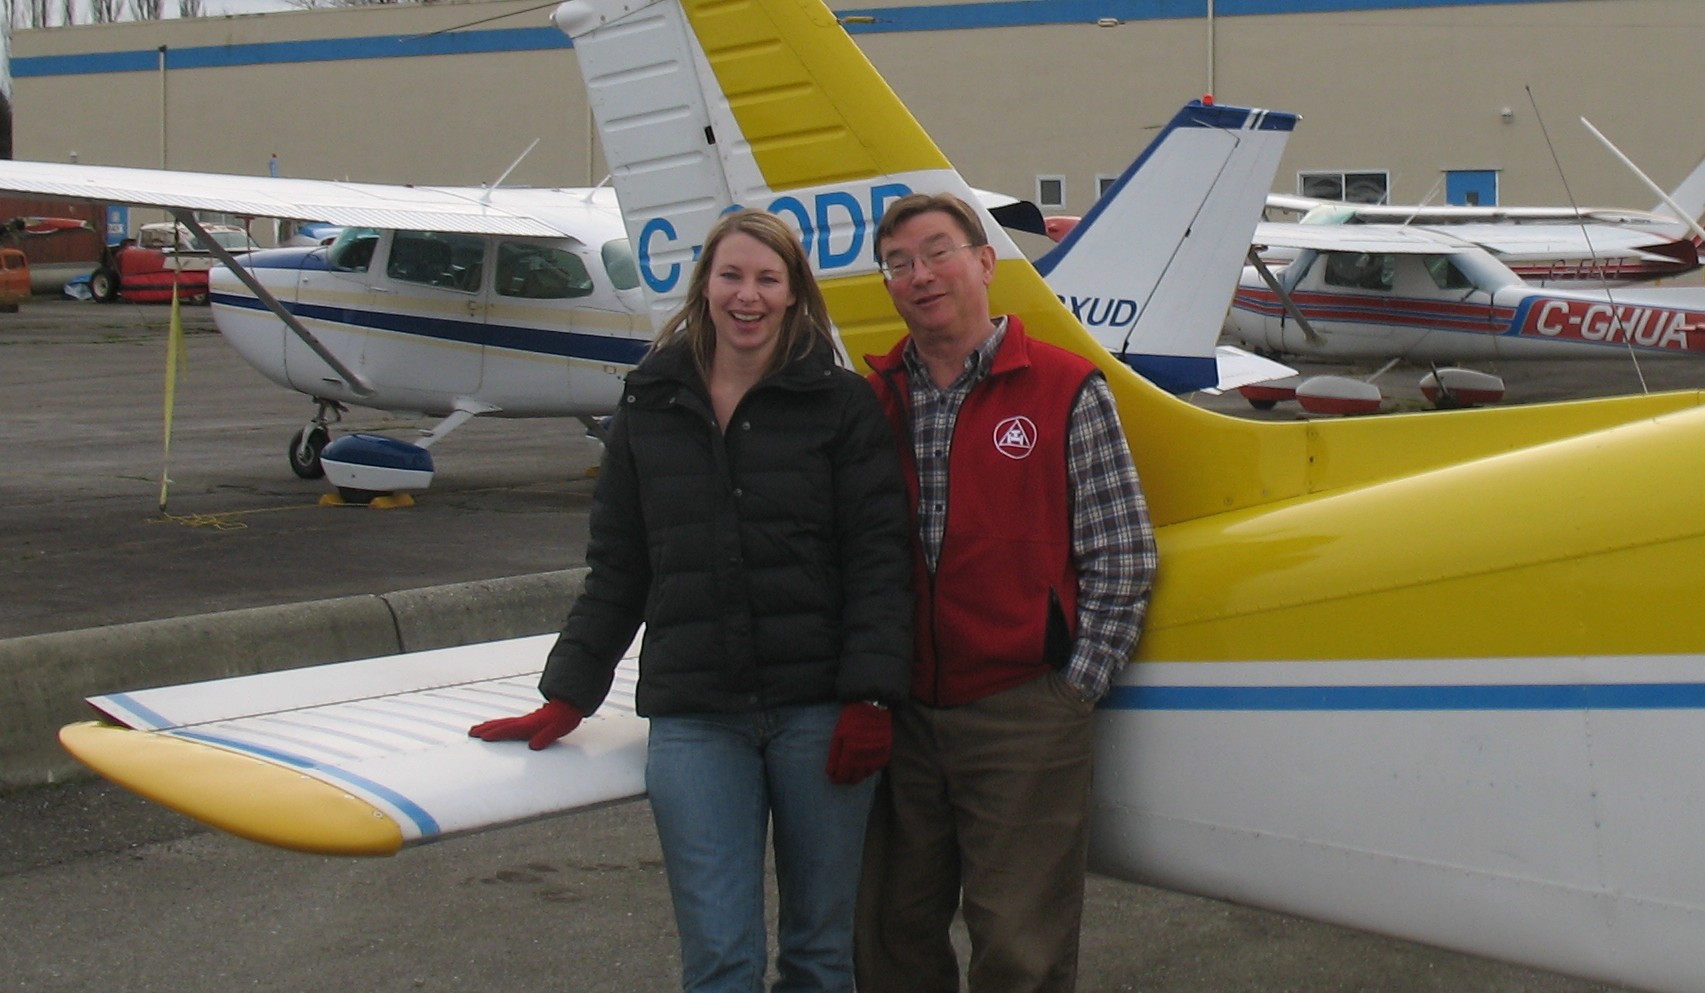 Christine Zboyousky with Pilot Examiner John Laing after the successful completion of Christine's Private Pilot Flight Test on January 7, 2010.  Langley Flying School.